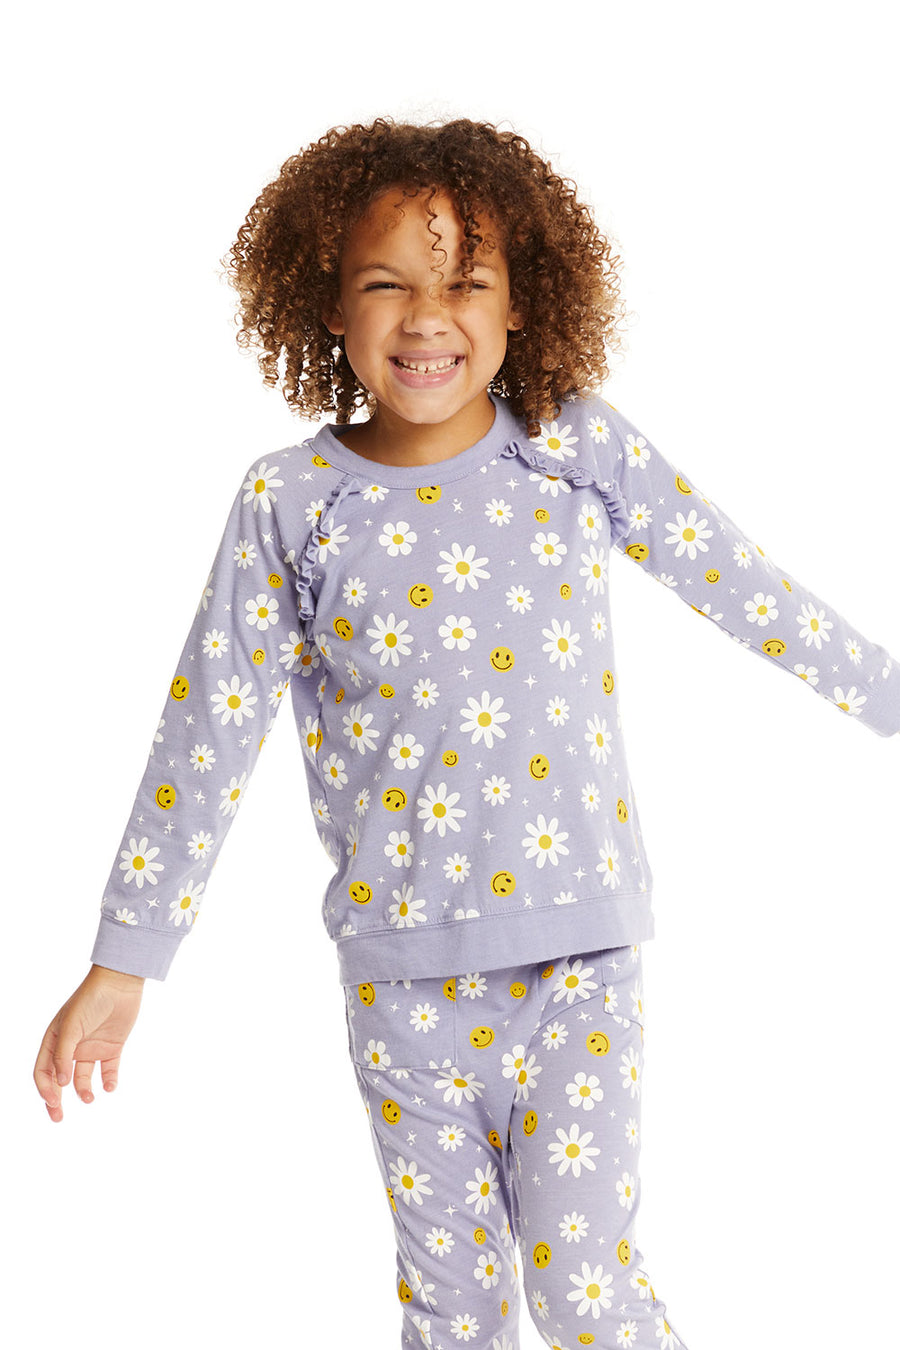 Smiley Daisies Long Sleeve Ruffle Top GIRLS chaserbrand